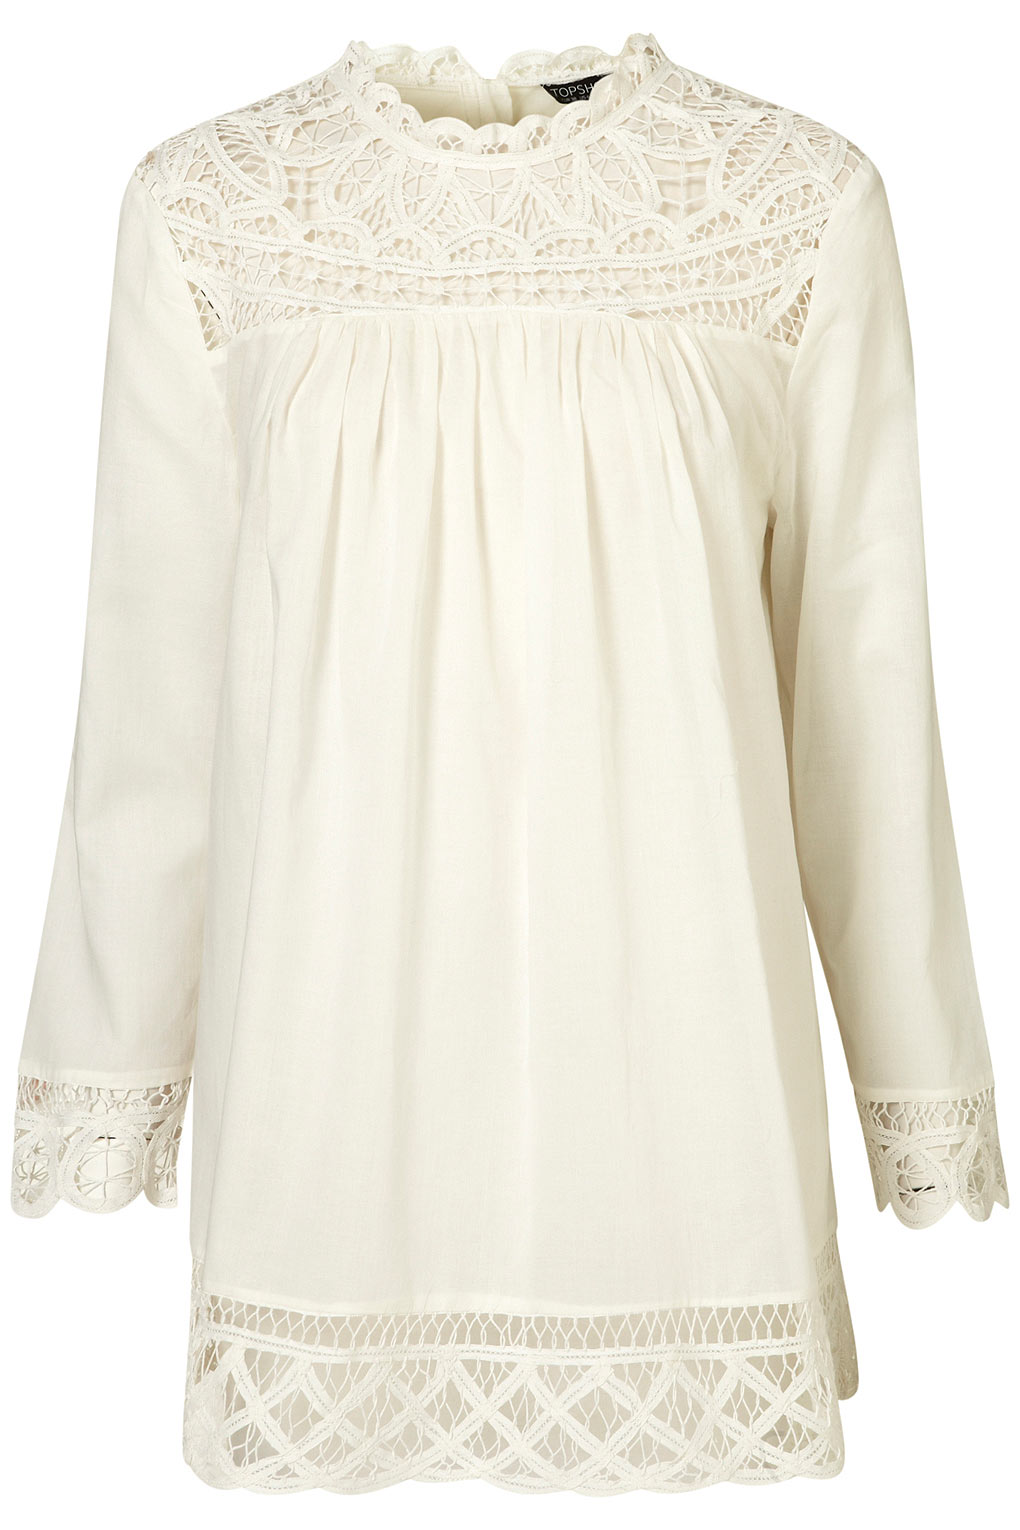 Lyst - Topshop Cream Cotton Tunic in Natural